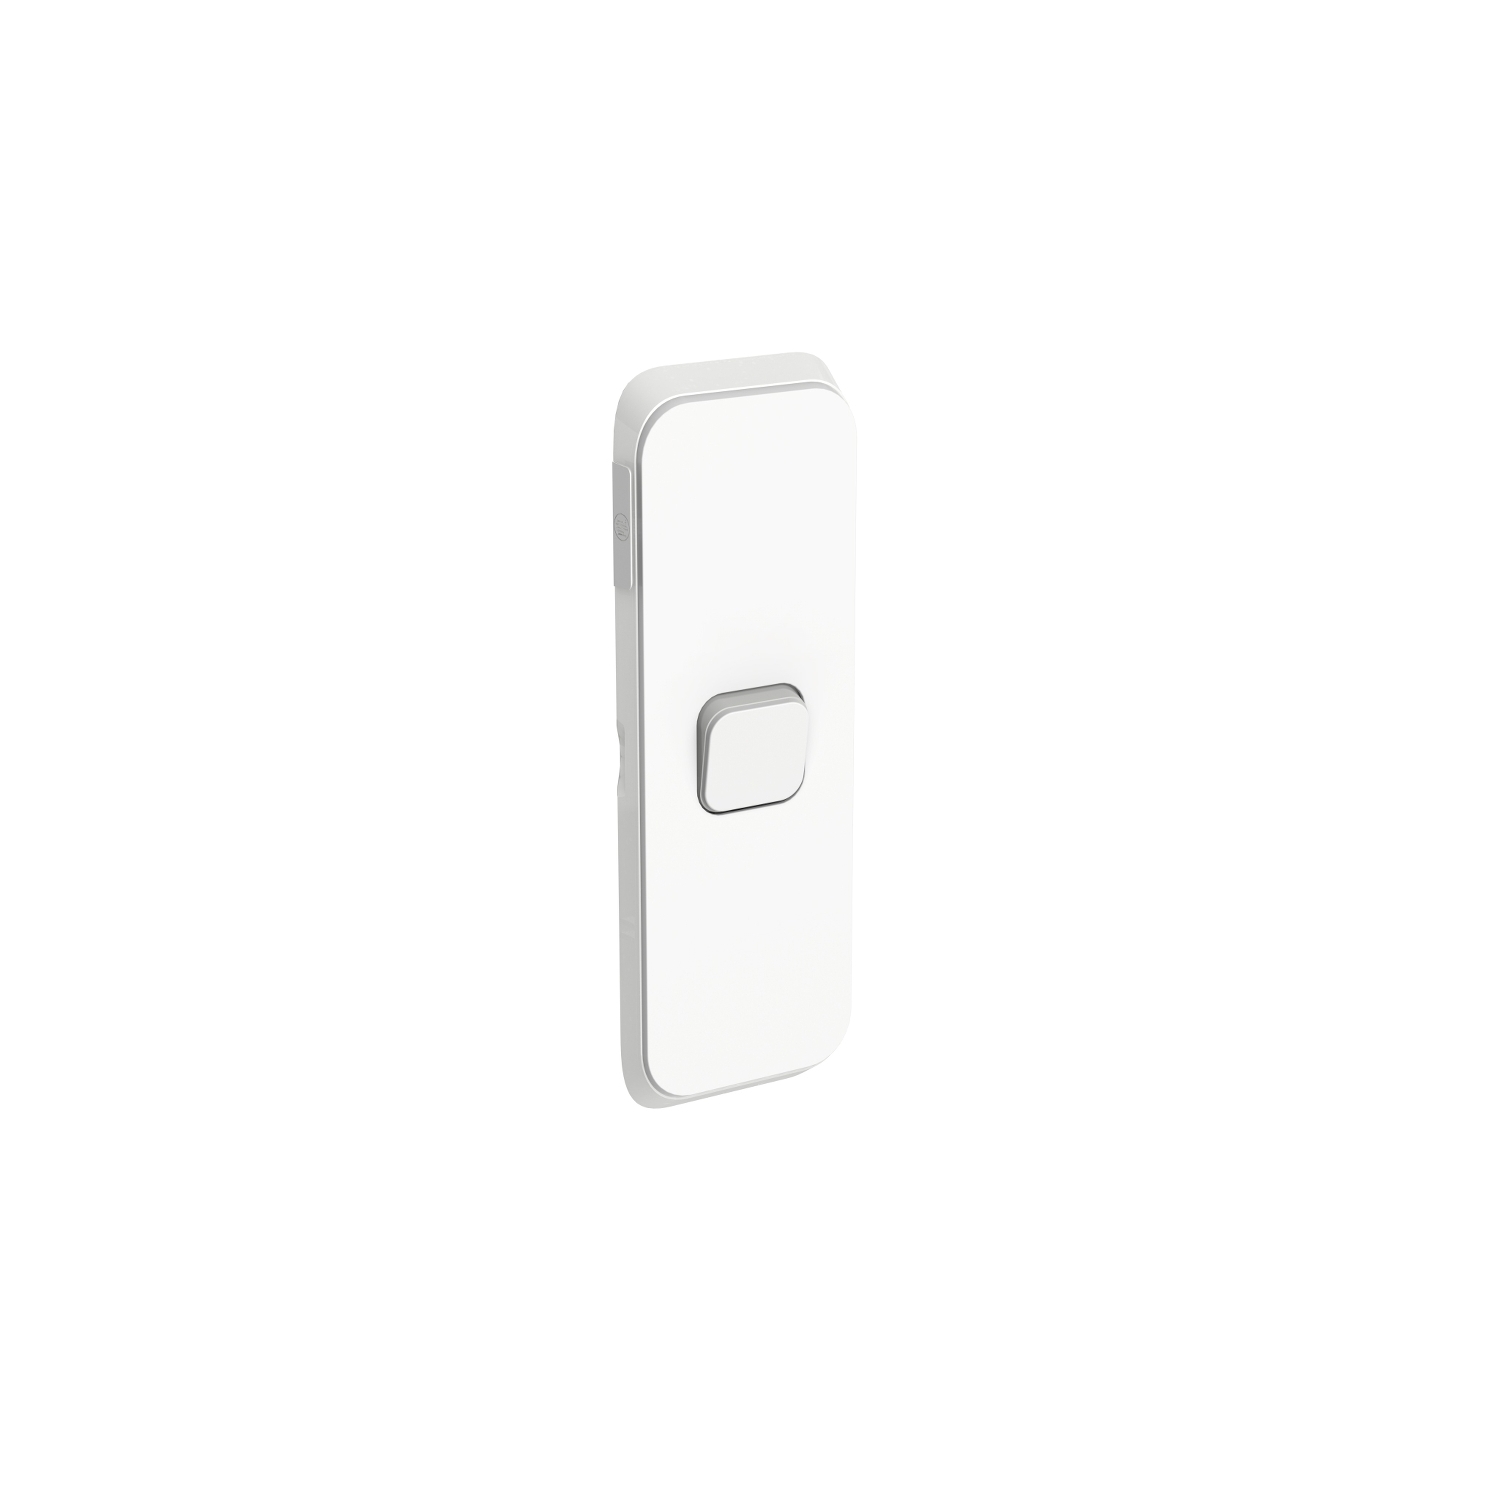 PDL361C-VW - PDL Iconic Cover Plate Switch Architrave 1Gang - Vivid White